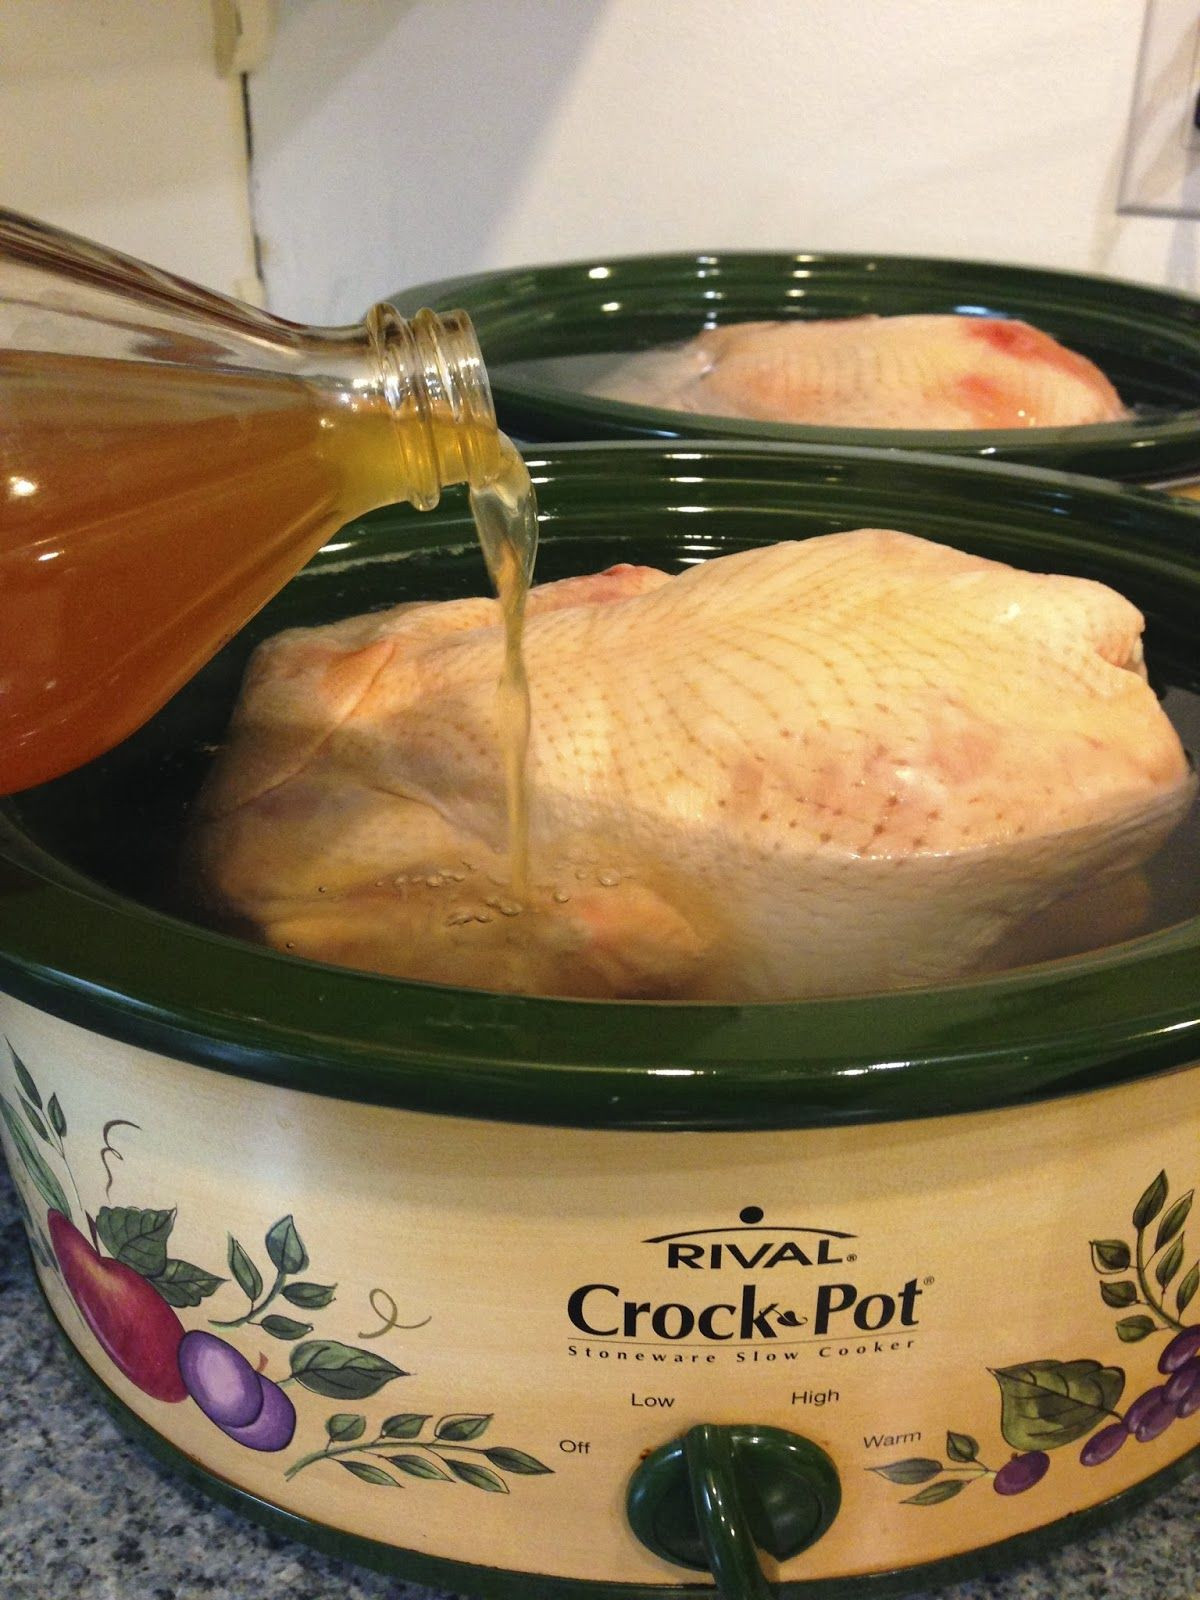 Frozen Whole Chicken In Slow Cooker
 The BENT Kitchen Recipe Whole Frozen Chicken in a Slow